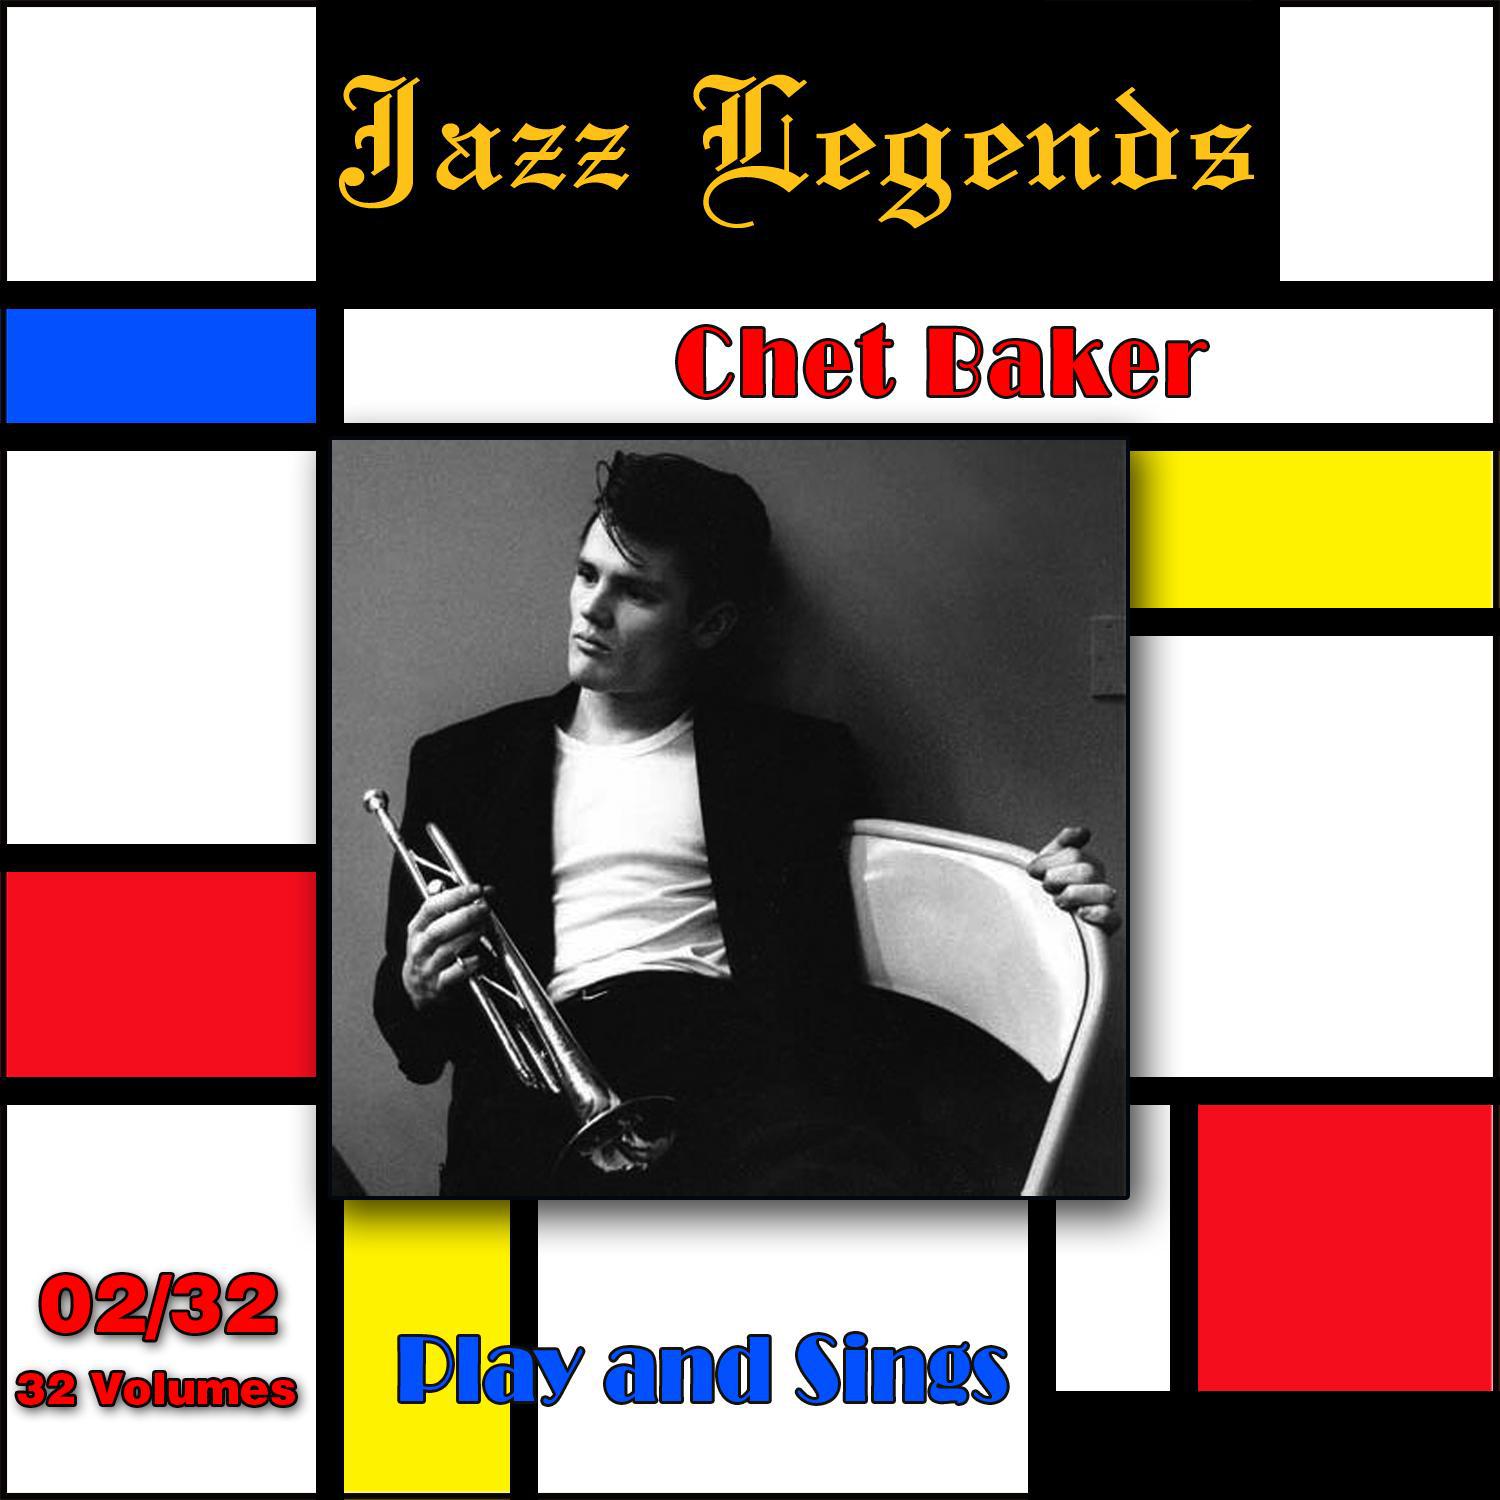 Jazz Legends Le gendes du Jazz, Vol. 02 32: Chet Baker  Play and Sings